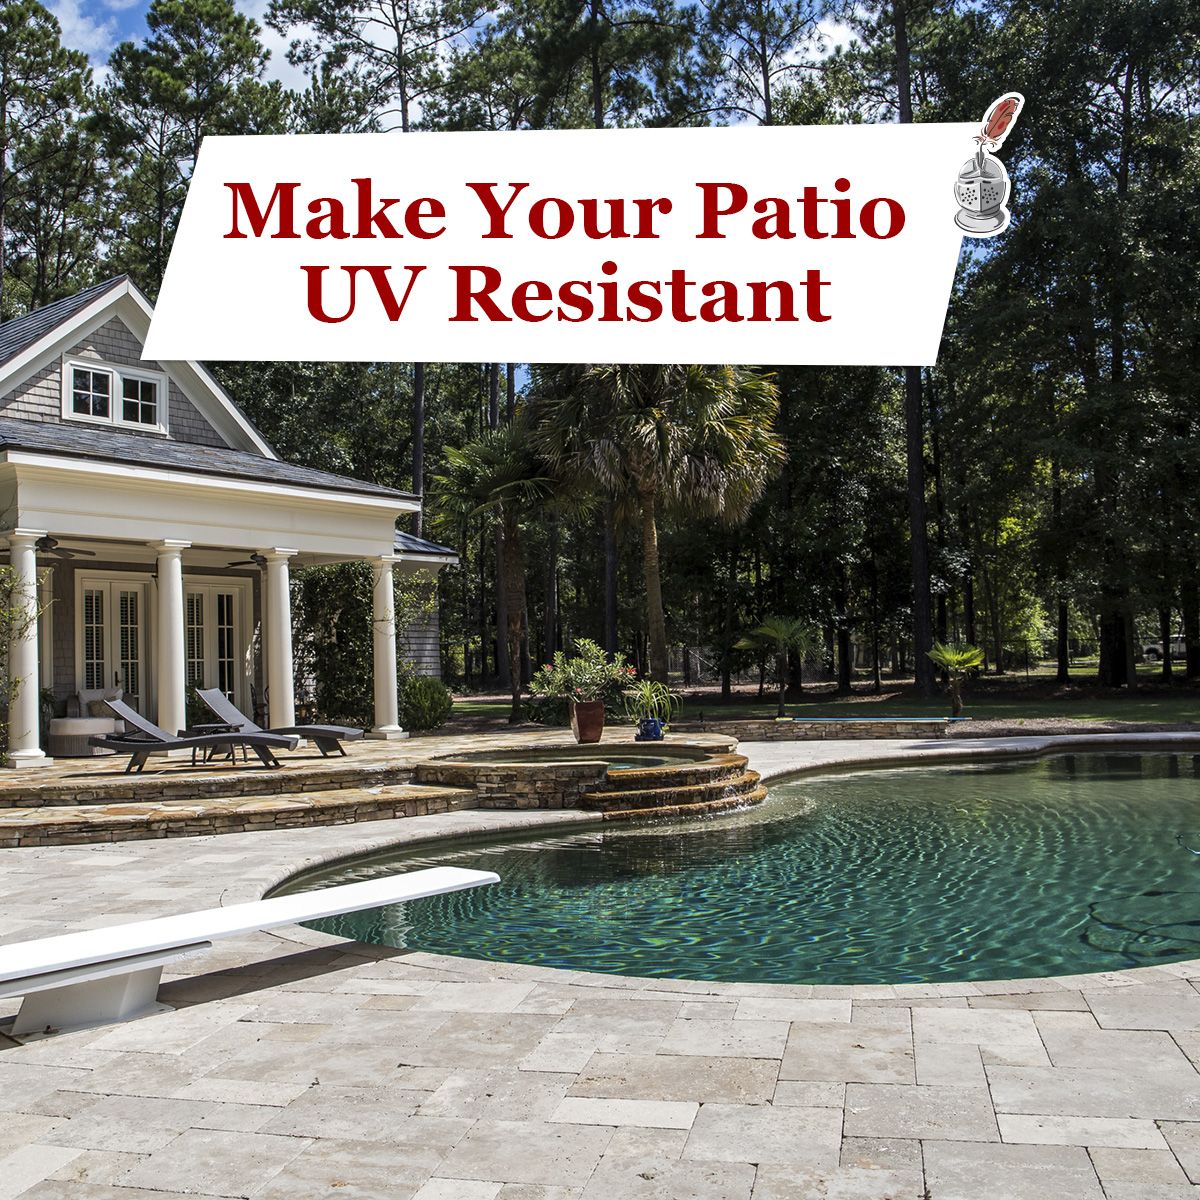 Make Your Patio UV Resistant